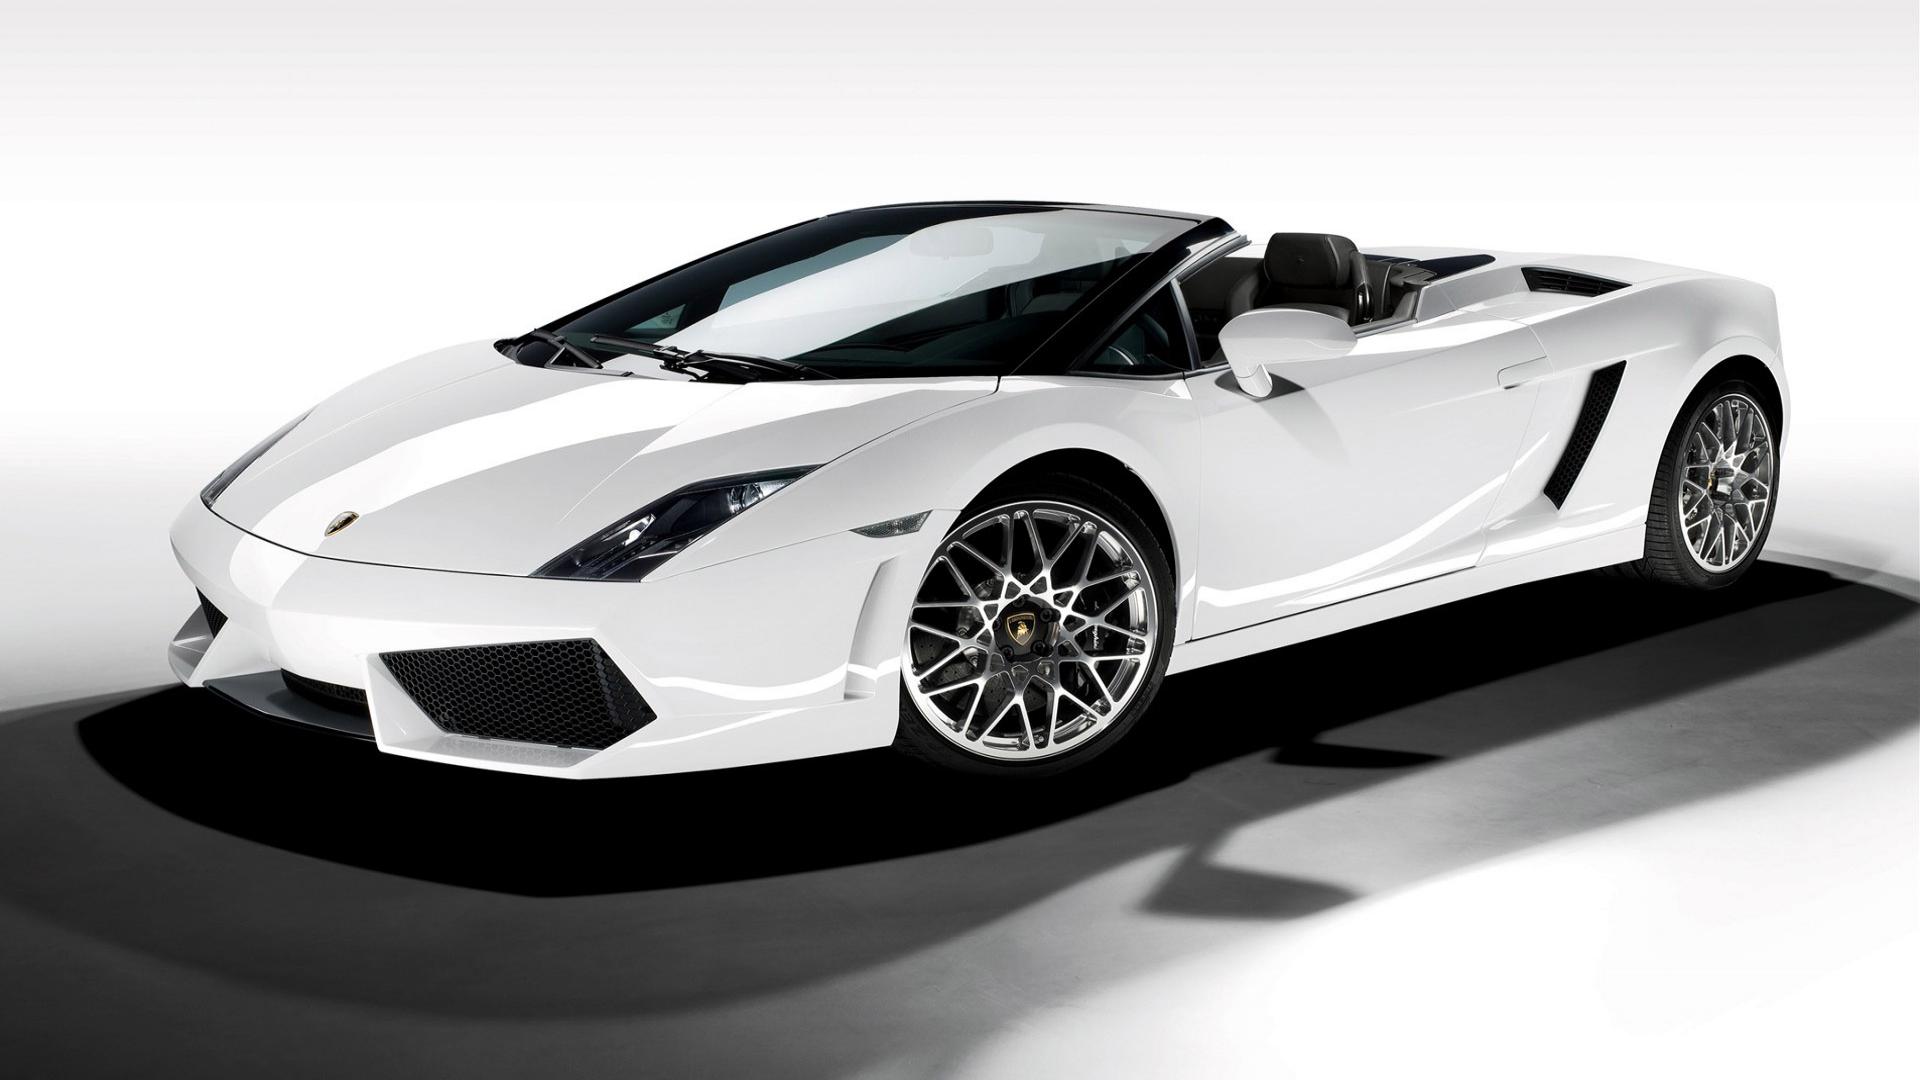 White Car HD Wallpapers 1920x1080 Car Wallpapers 1920x1080 Download